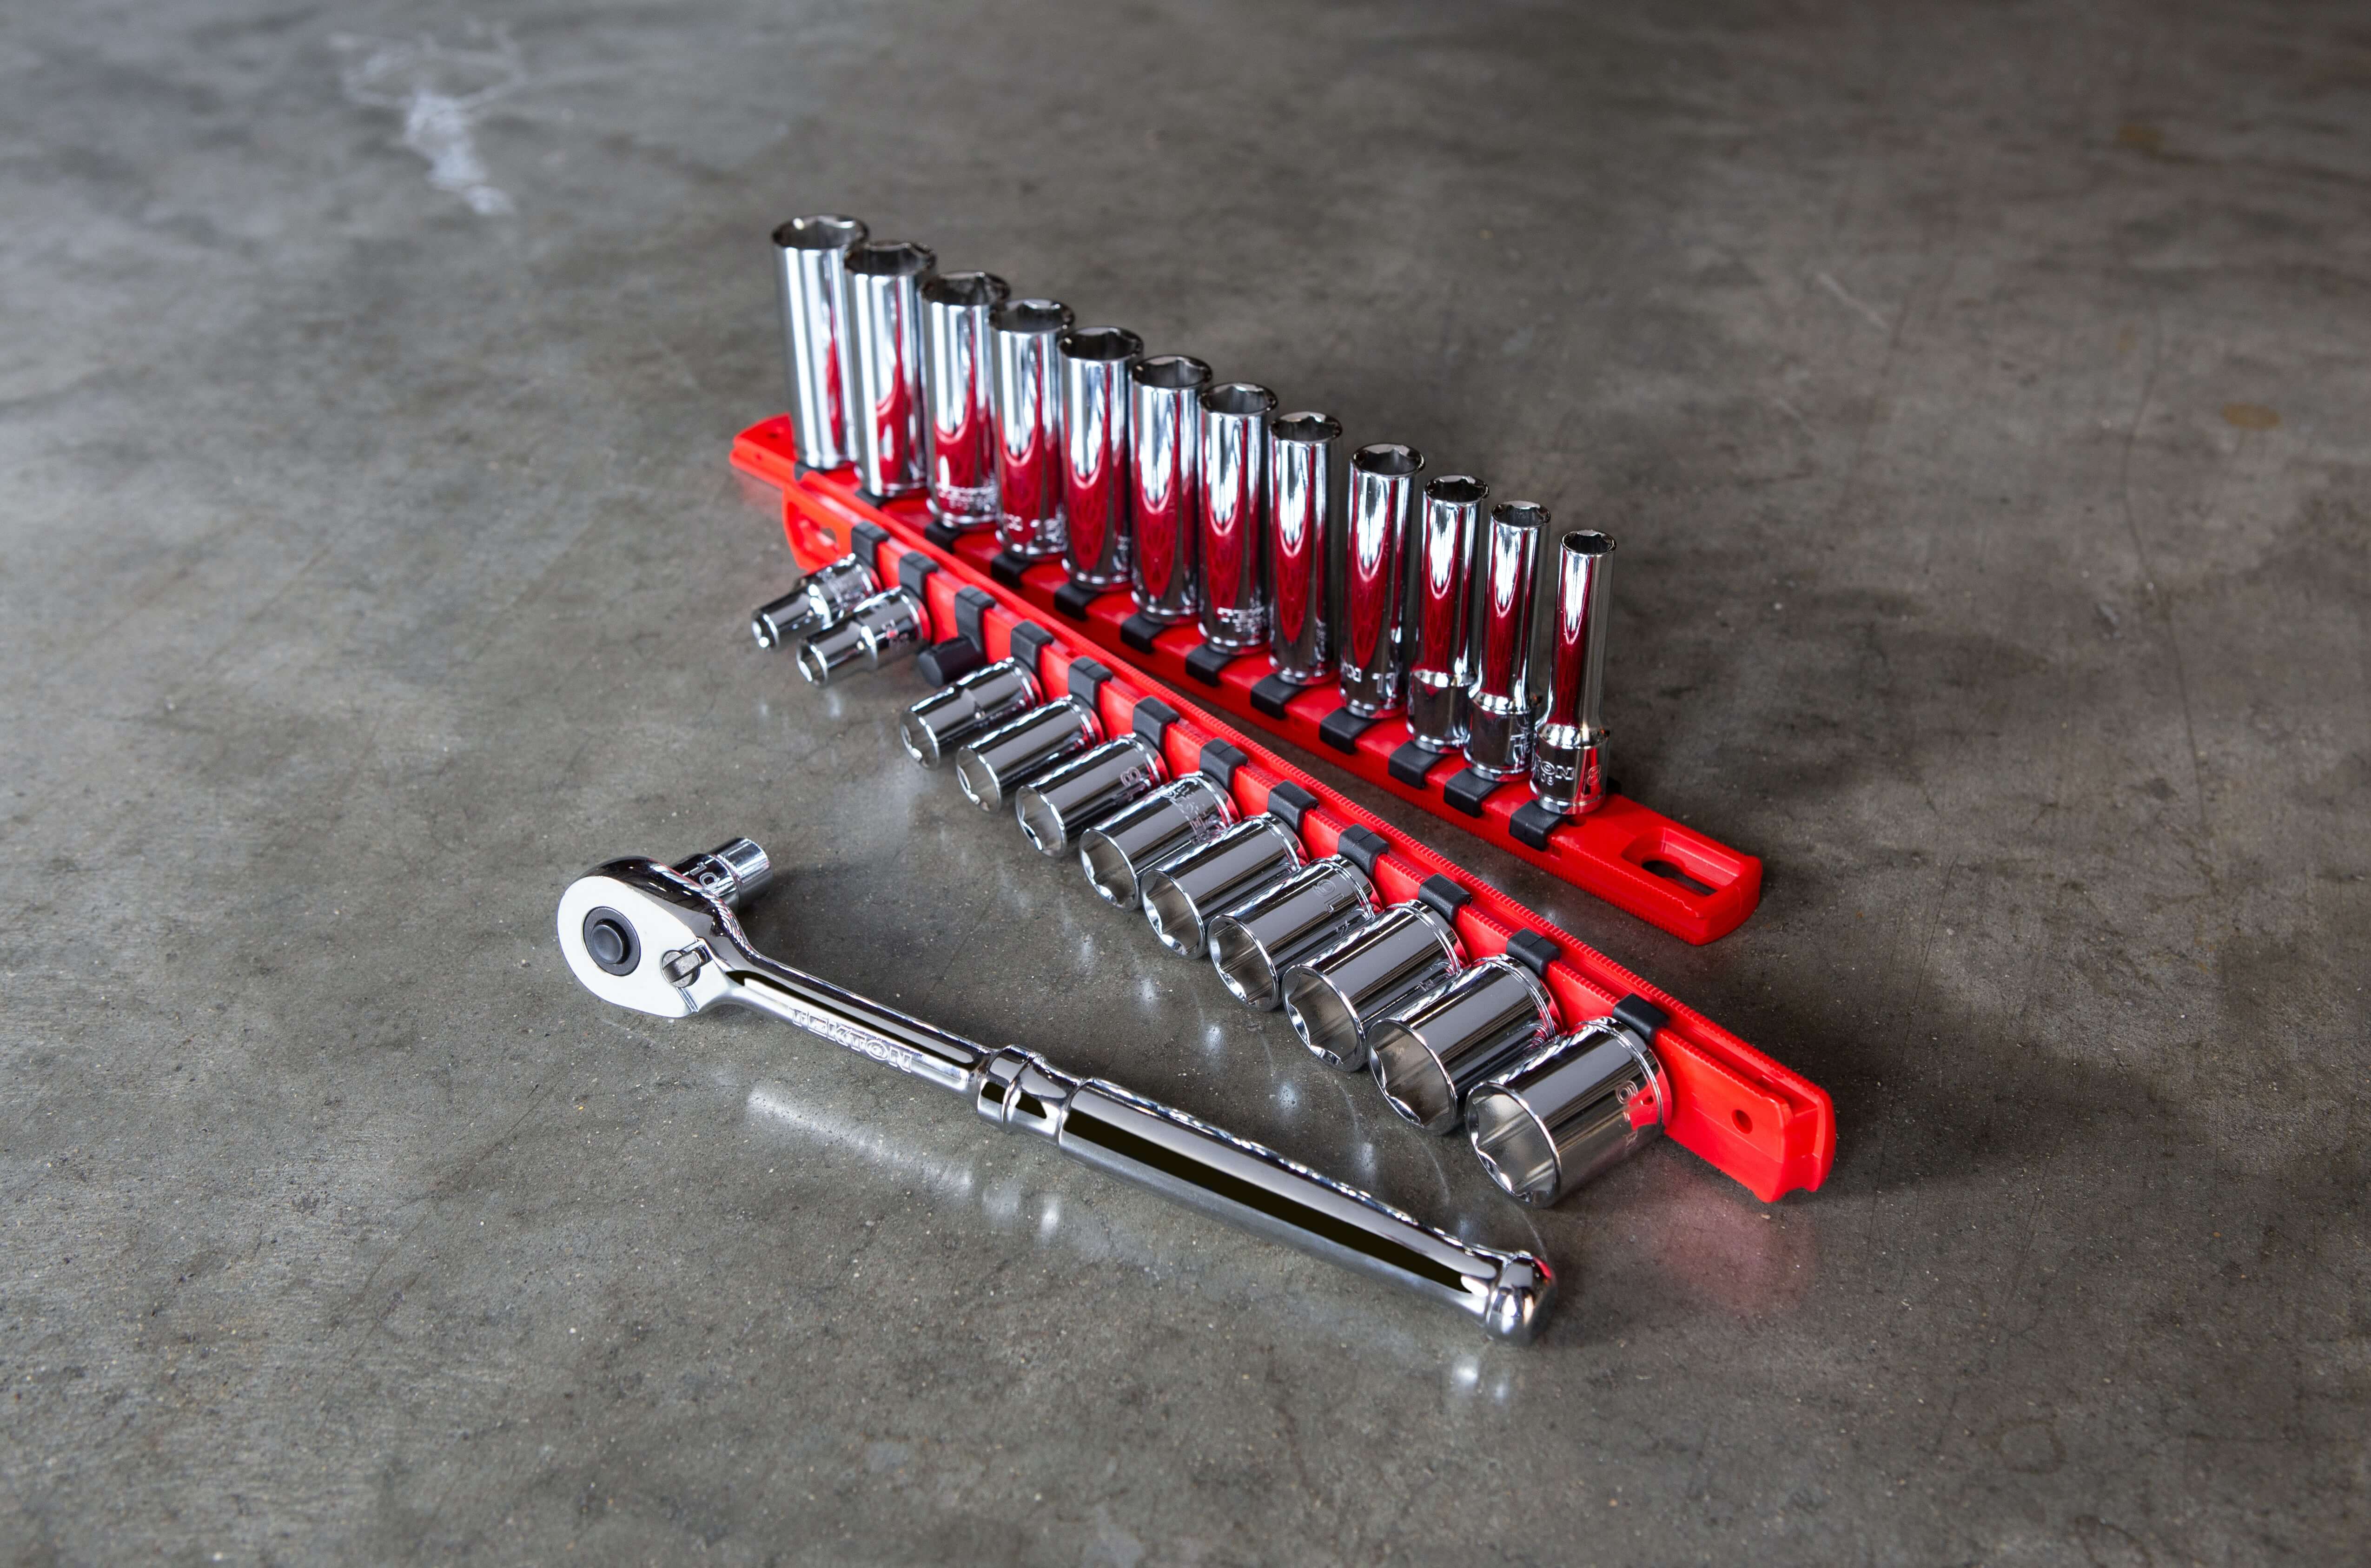 A socket wrench with various sized attachments